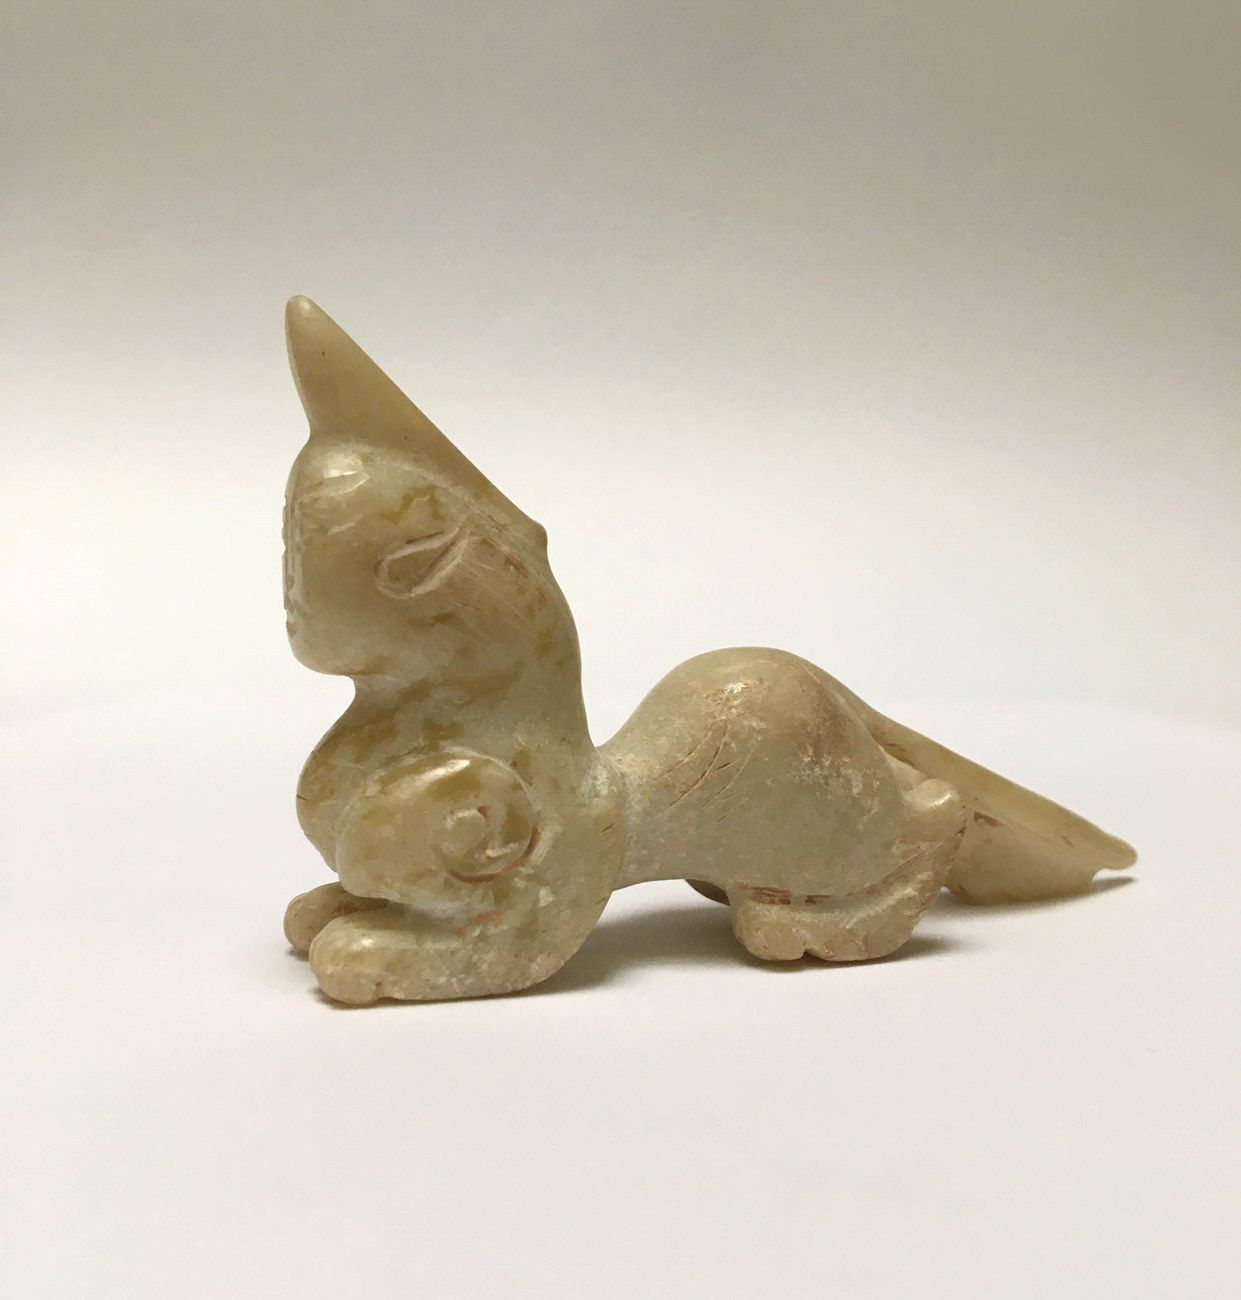 Null Mythical animal in beige jade. Body of a feline and head of a man.

Influen&hellip;